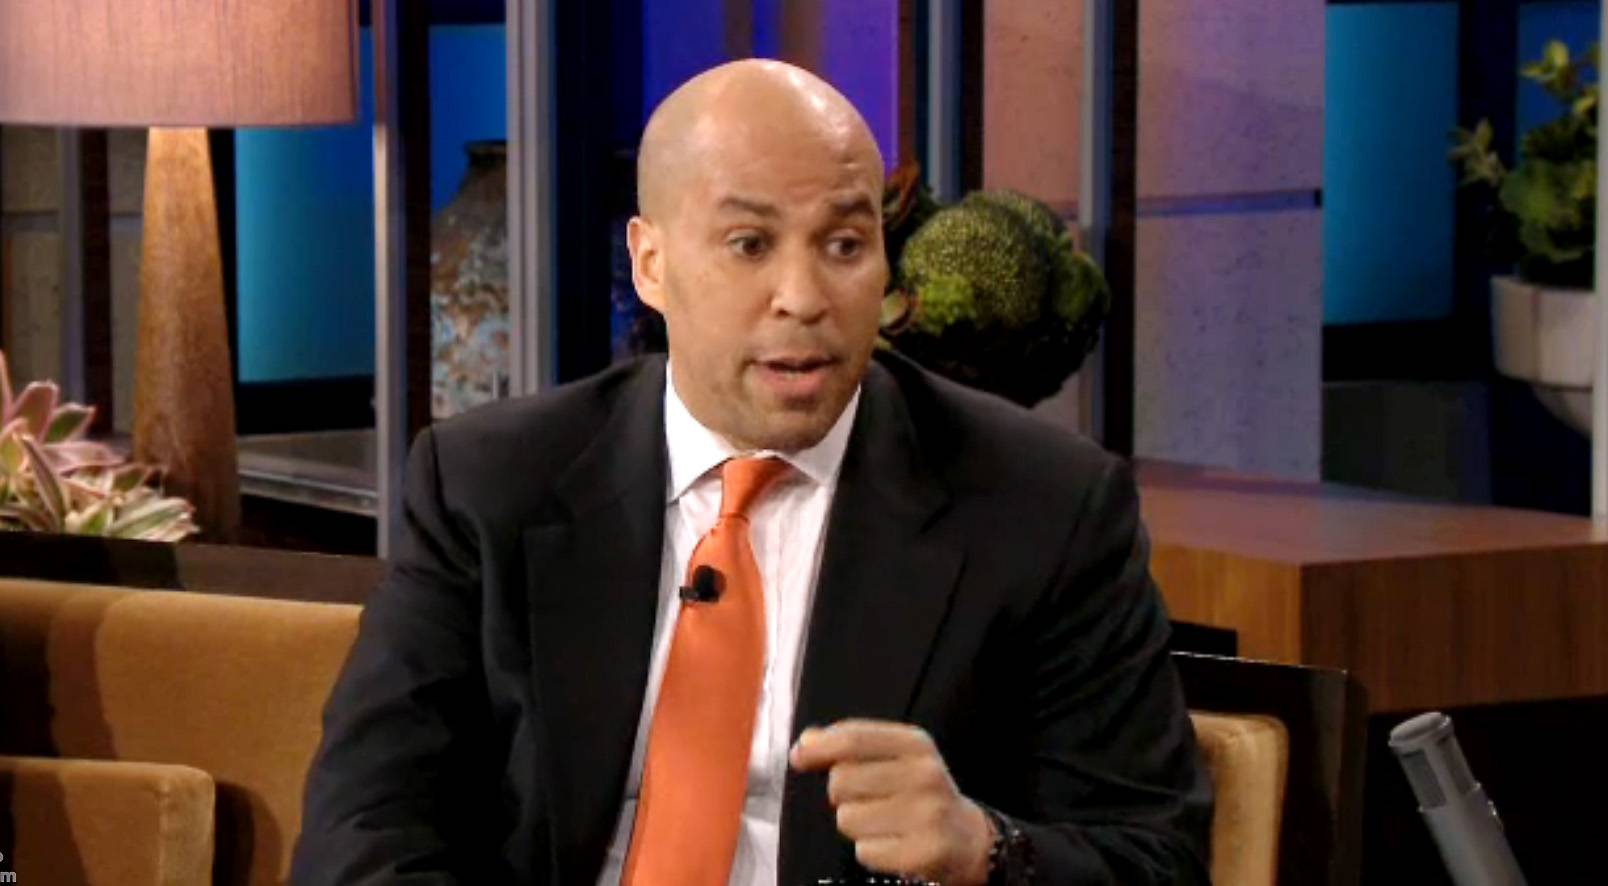 Cory Booker and President Obama Remain BFFs - After his comments on Meet the Press appeared to undermine his support of President Obama, Newark Mayor Cory Booker told Tonight Show host Jay Leno Monday that while he wasn’t &quot;at his best&quot; during the interview, President Obama &quot;was incredibly gracious.&quot; After the incident, the president was the &quot;first person to step forward and say, &quot;Hey, you're my friend, we all say things that don’t come out as we mean them, and I'm still with you,'&quot; Booker said.&nbsp;(Photo: NBC)